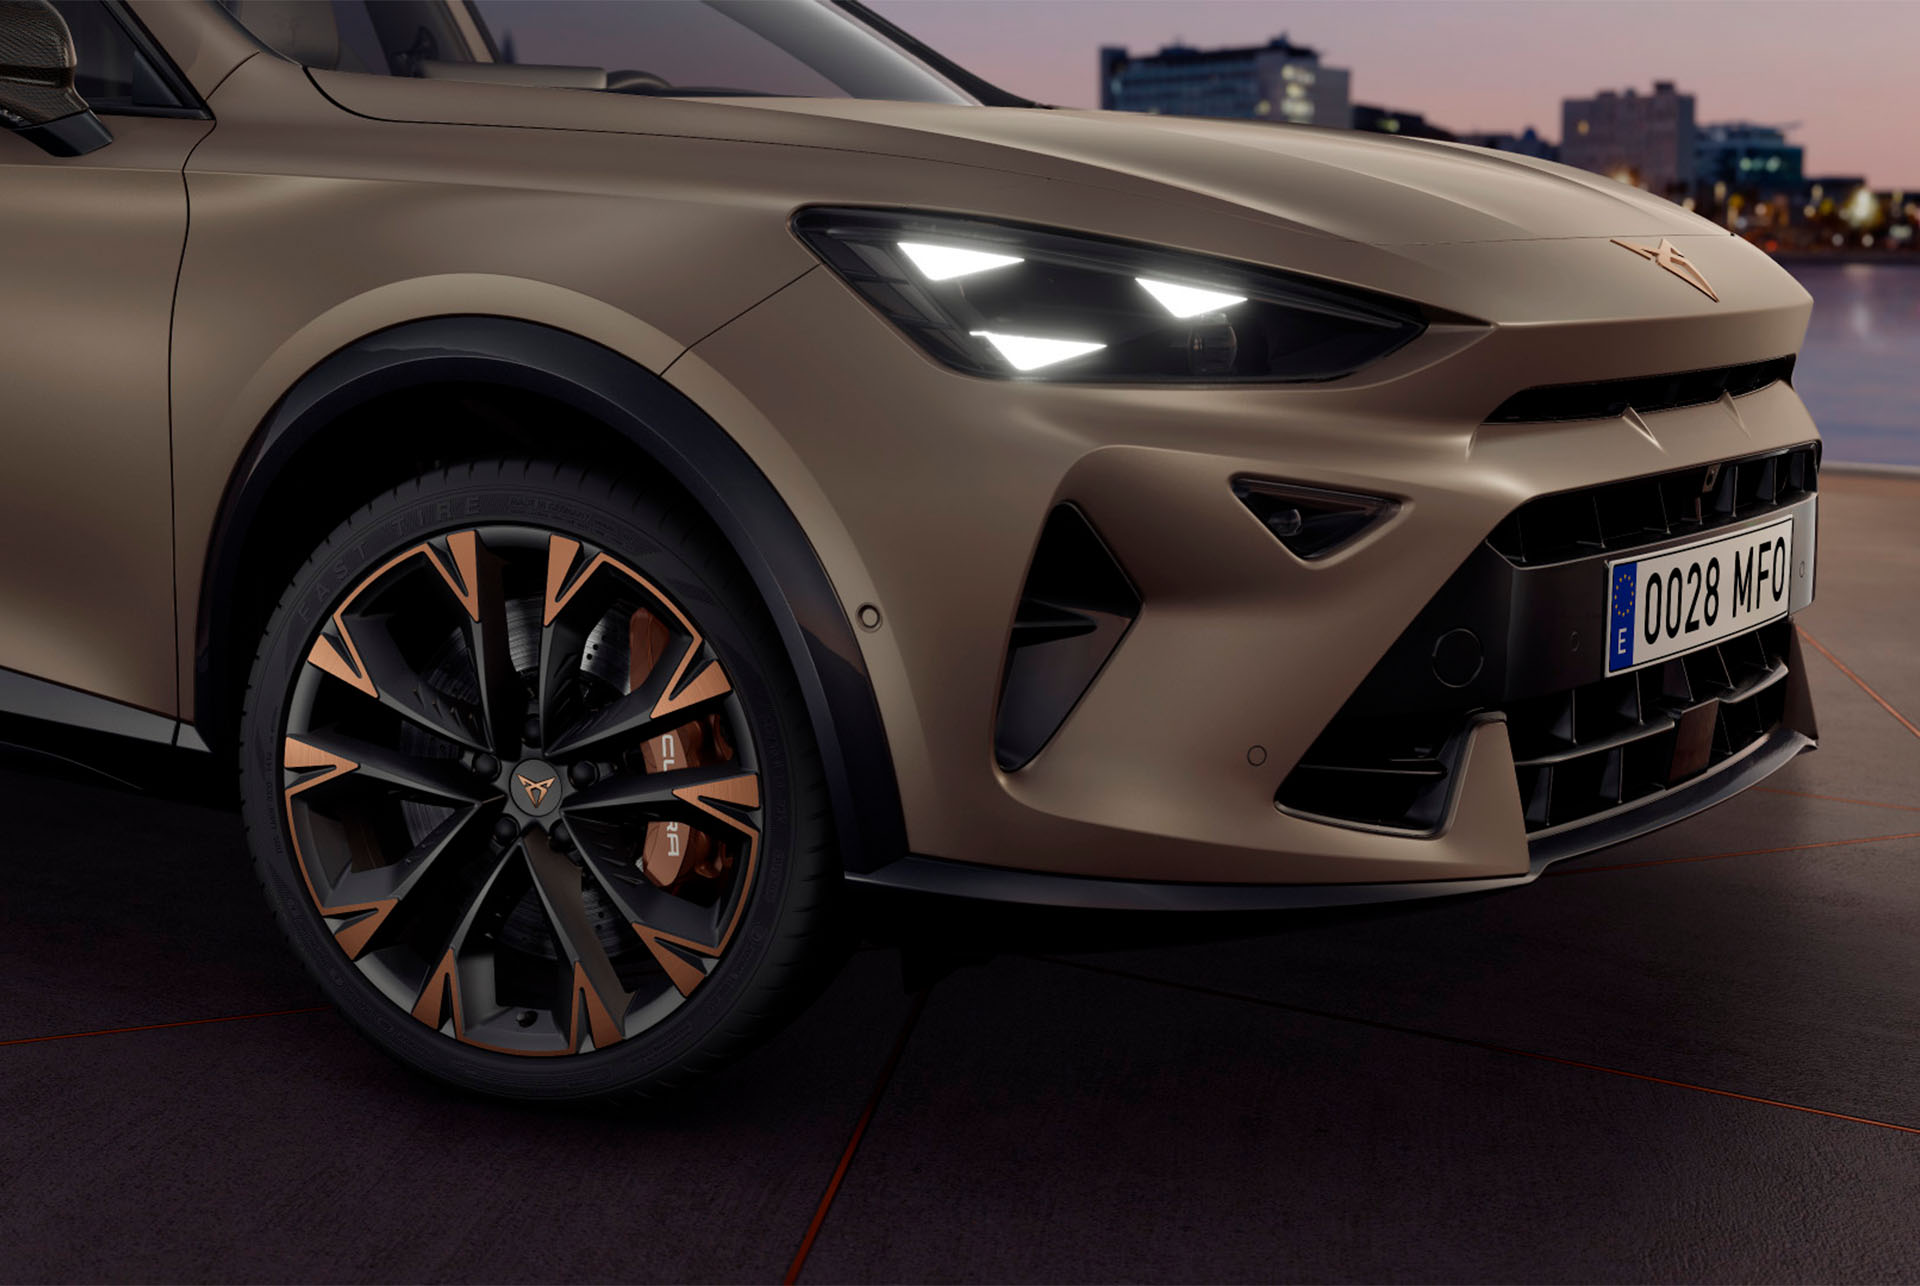 Exterior view of new CUPRA Formentor 2024 copper accent wheels, Akebono brakes, wing mirror, tyres, signature triangle eye LED headlights and CUPRA logo.